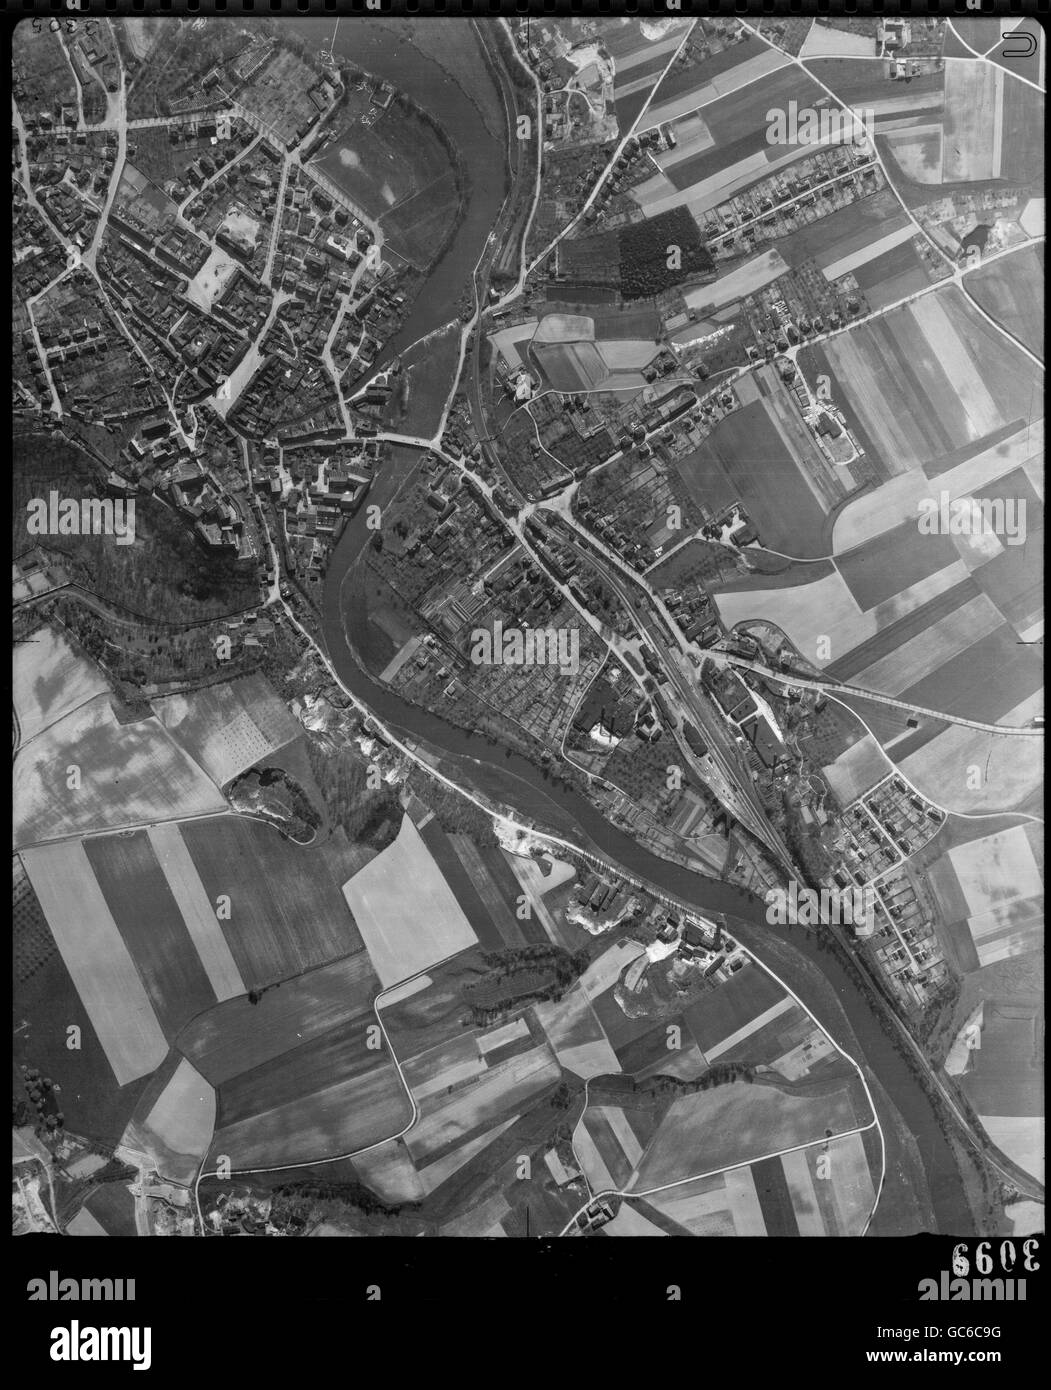 - MANDATORY CREDIT CROWN COPYRIGHT/RCAHMS Colditz Castle in Saxony, Germany, on 10 April 1945 just three days before US forces over-ran the area. The image is from The Aerial reconnaissance Archive (TARA) whose custodian is the Royal Commission on the Ancient and Historical Monuments of Scotland (RCAHMS) and which from this Monday, be available on-line to the public. Stock Photo